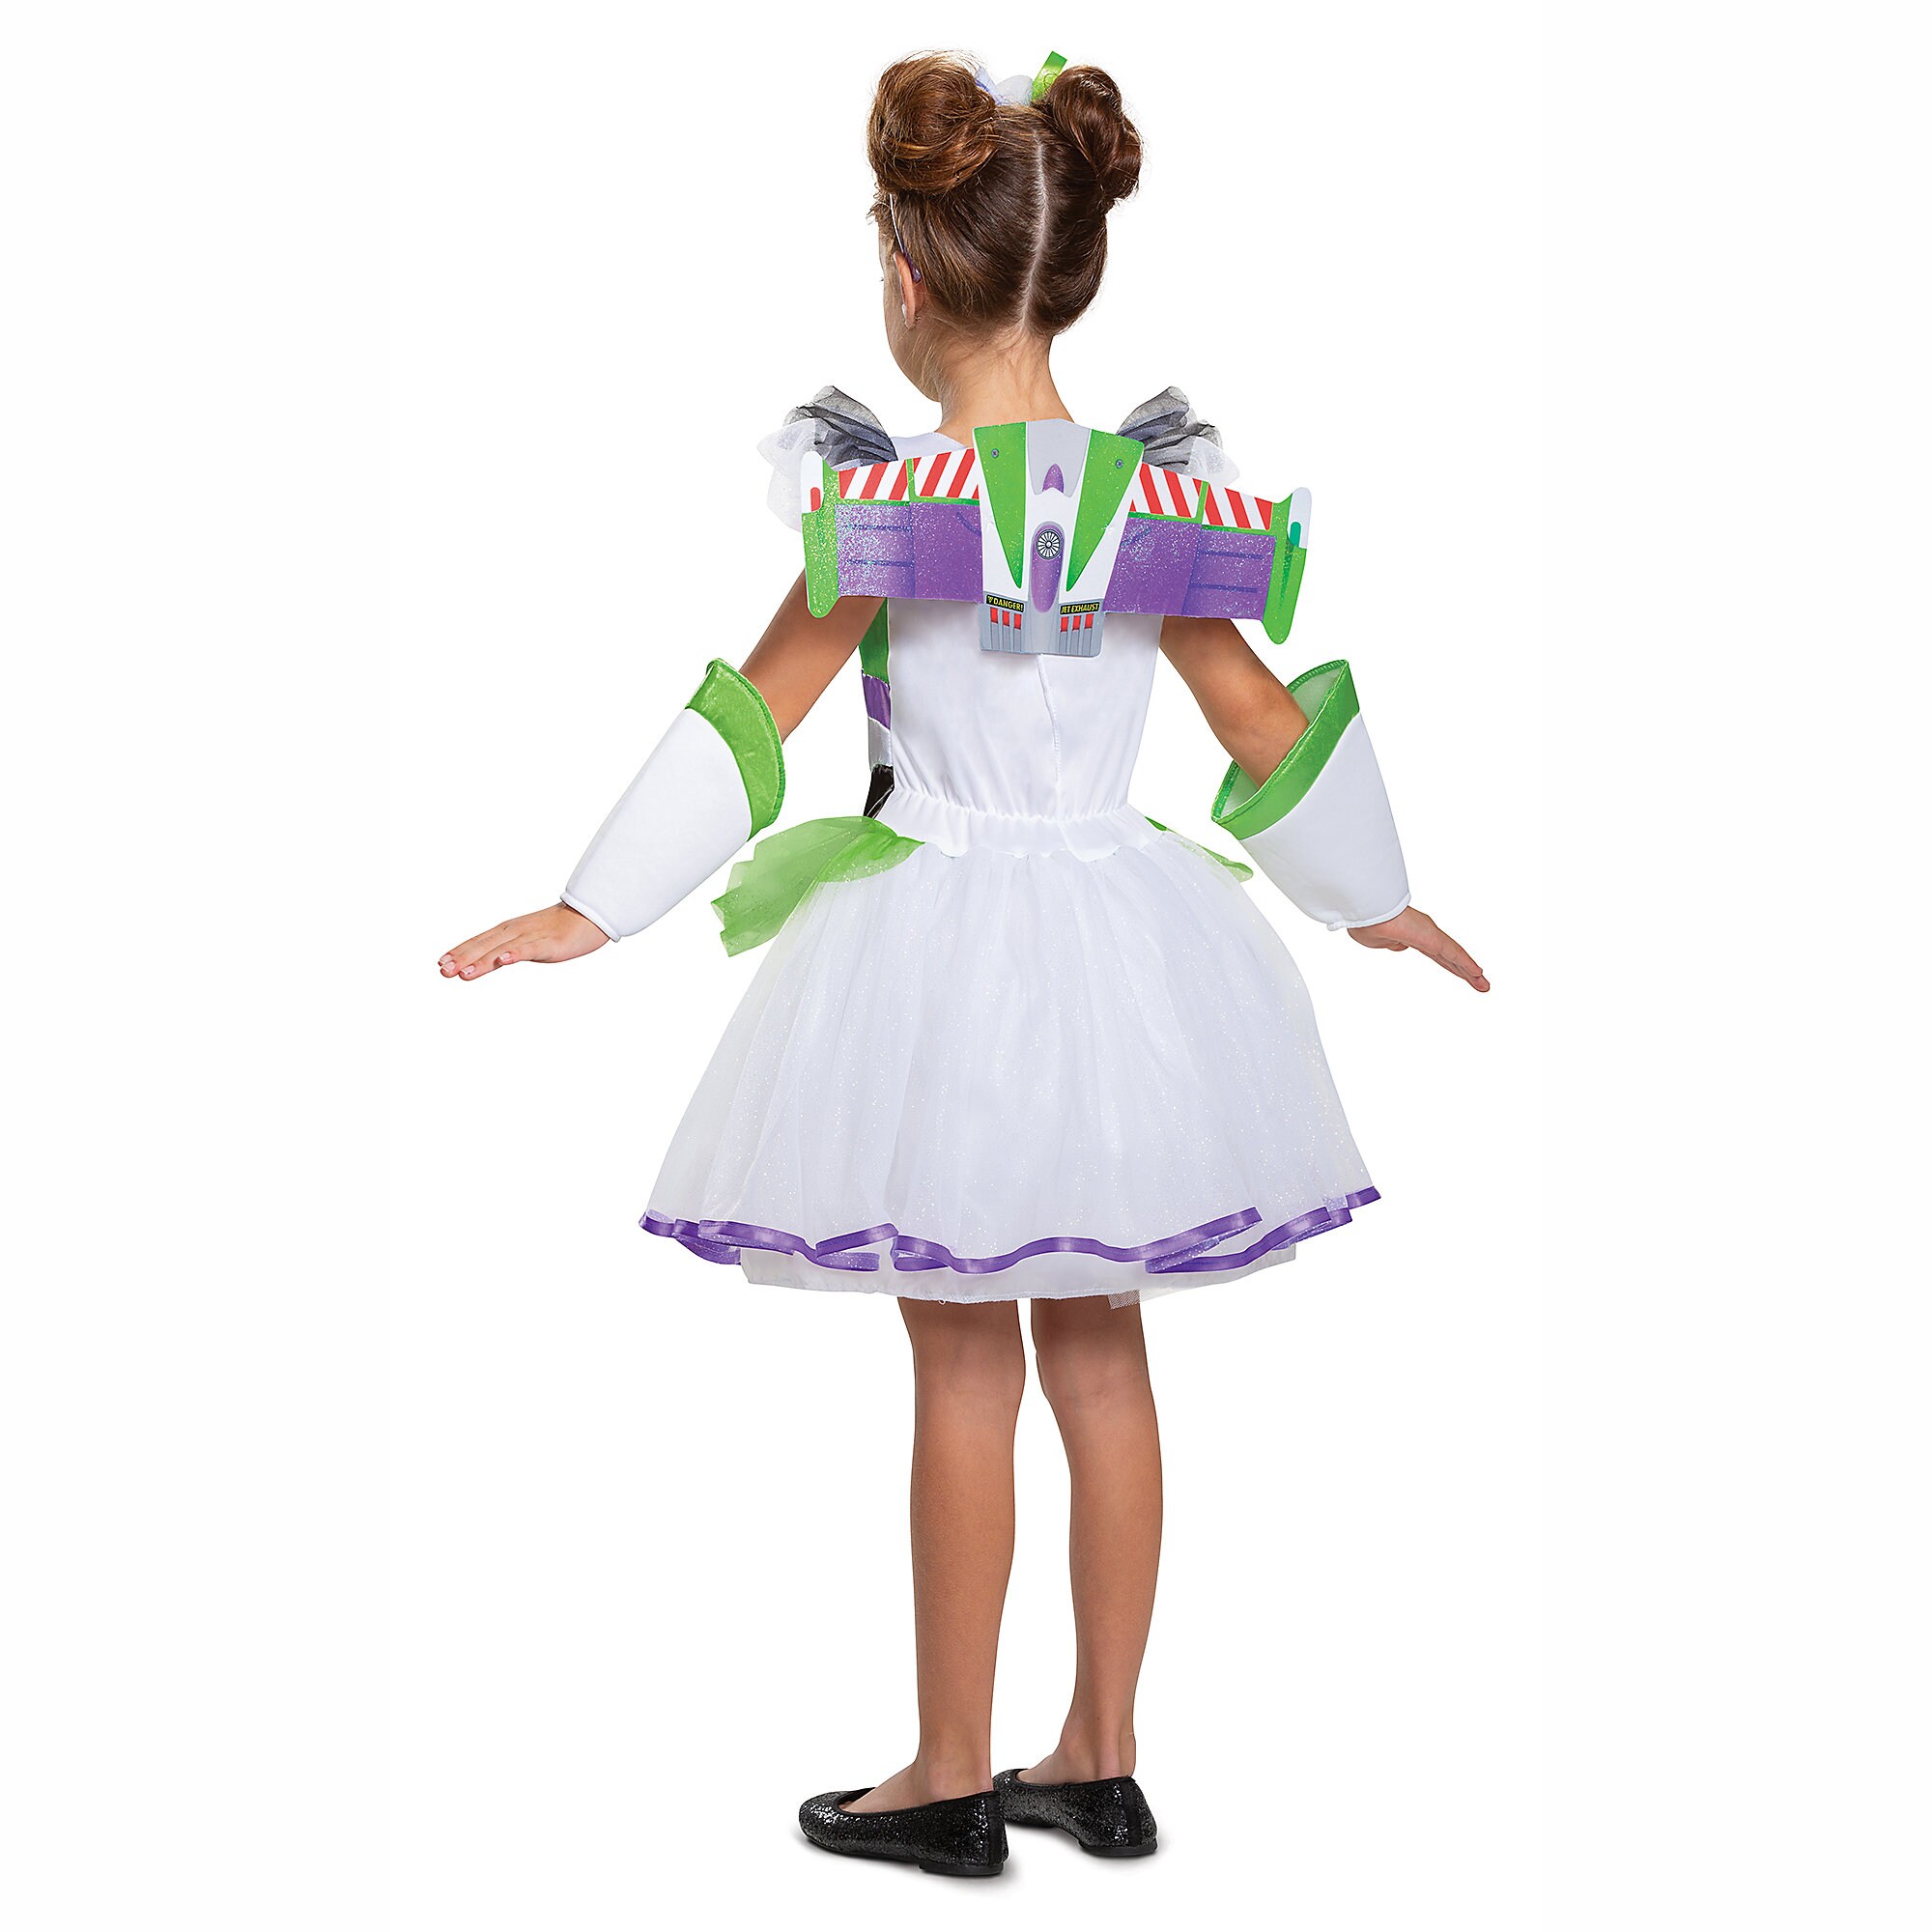 Buzz Lightyear Costume Tutu for Kids by Disguise